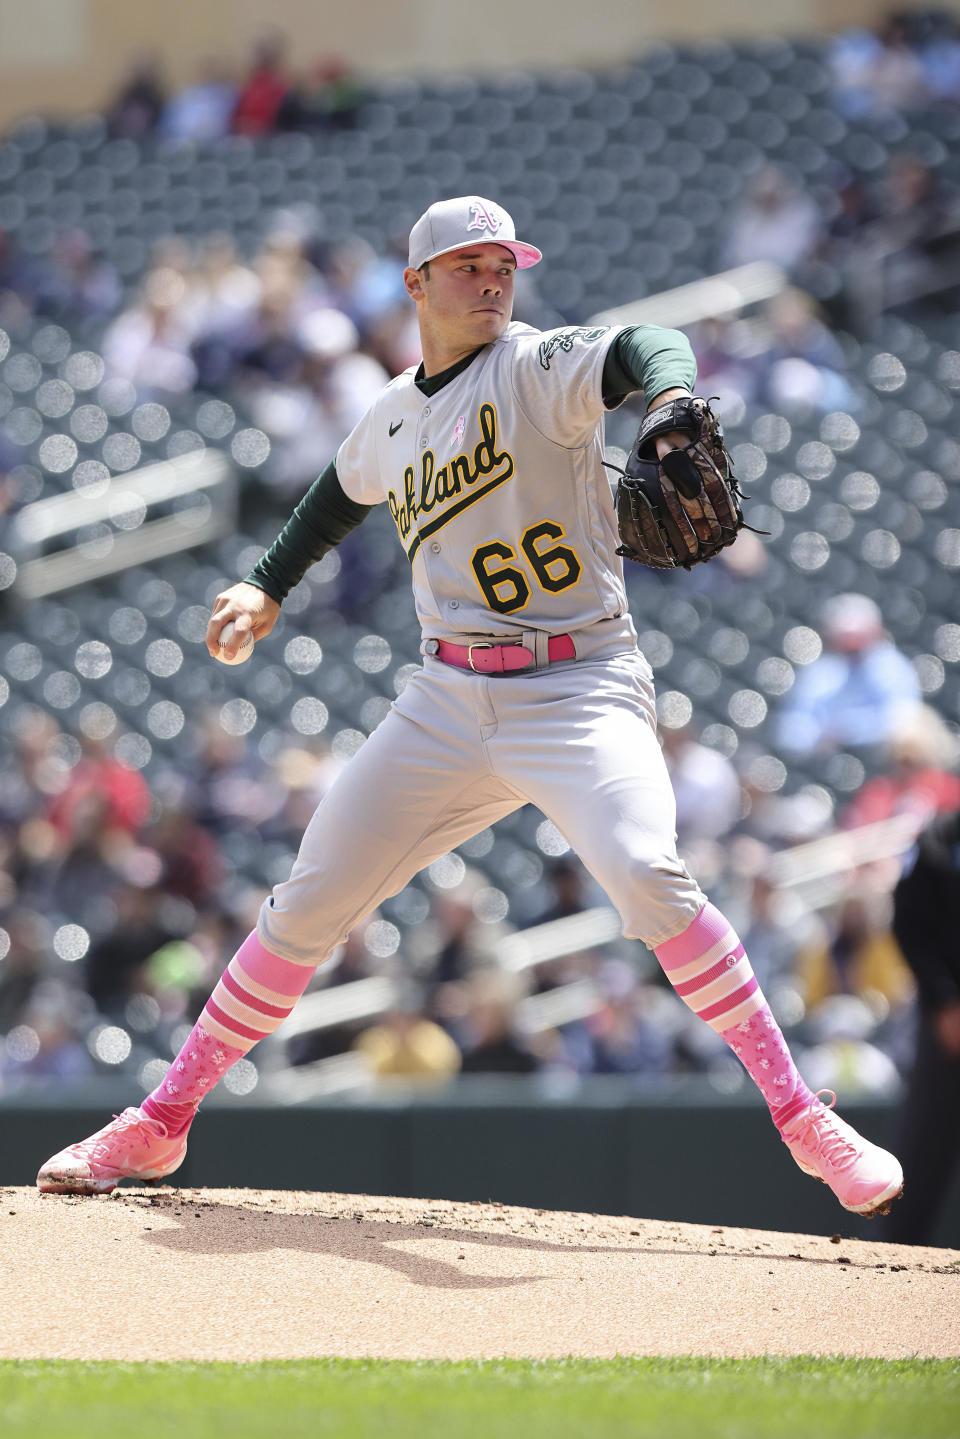 Oakland Athletics starting pitcher Daulton Jefferies (66) throws against the Minnesota Twins during the first inning of a baseball game, Sunday, May 8, 2022, in Minneapolis. (AP Photo/Stacy Bengs)